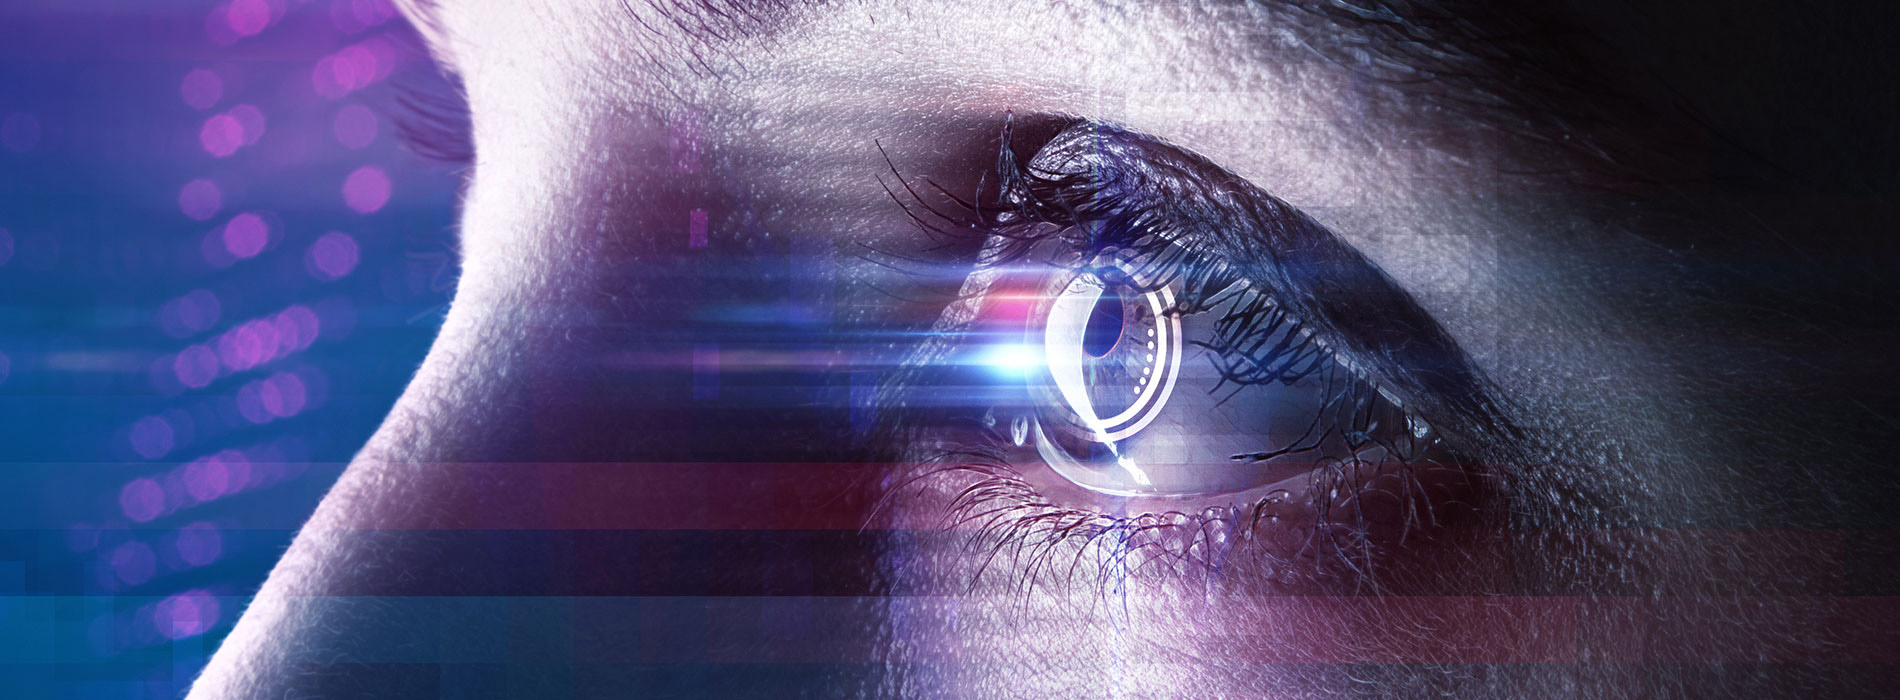 The image features a close-up of a person s eye, which is the focal point, with a digital or futuristic background that includes blue and purple hues.